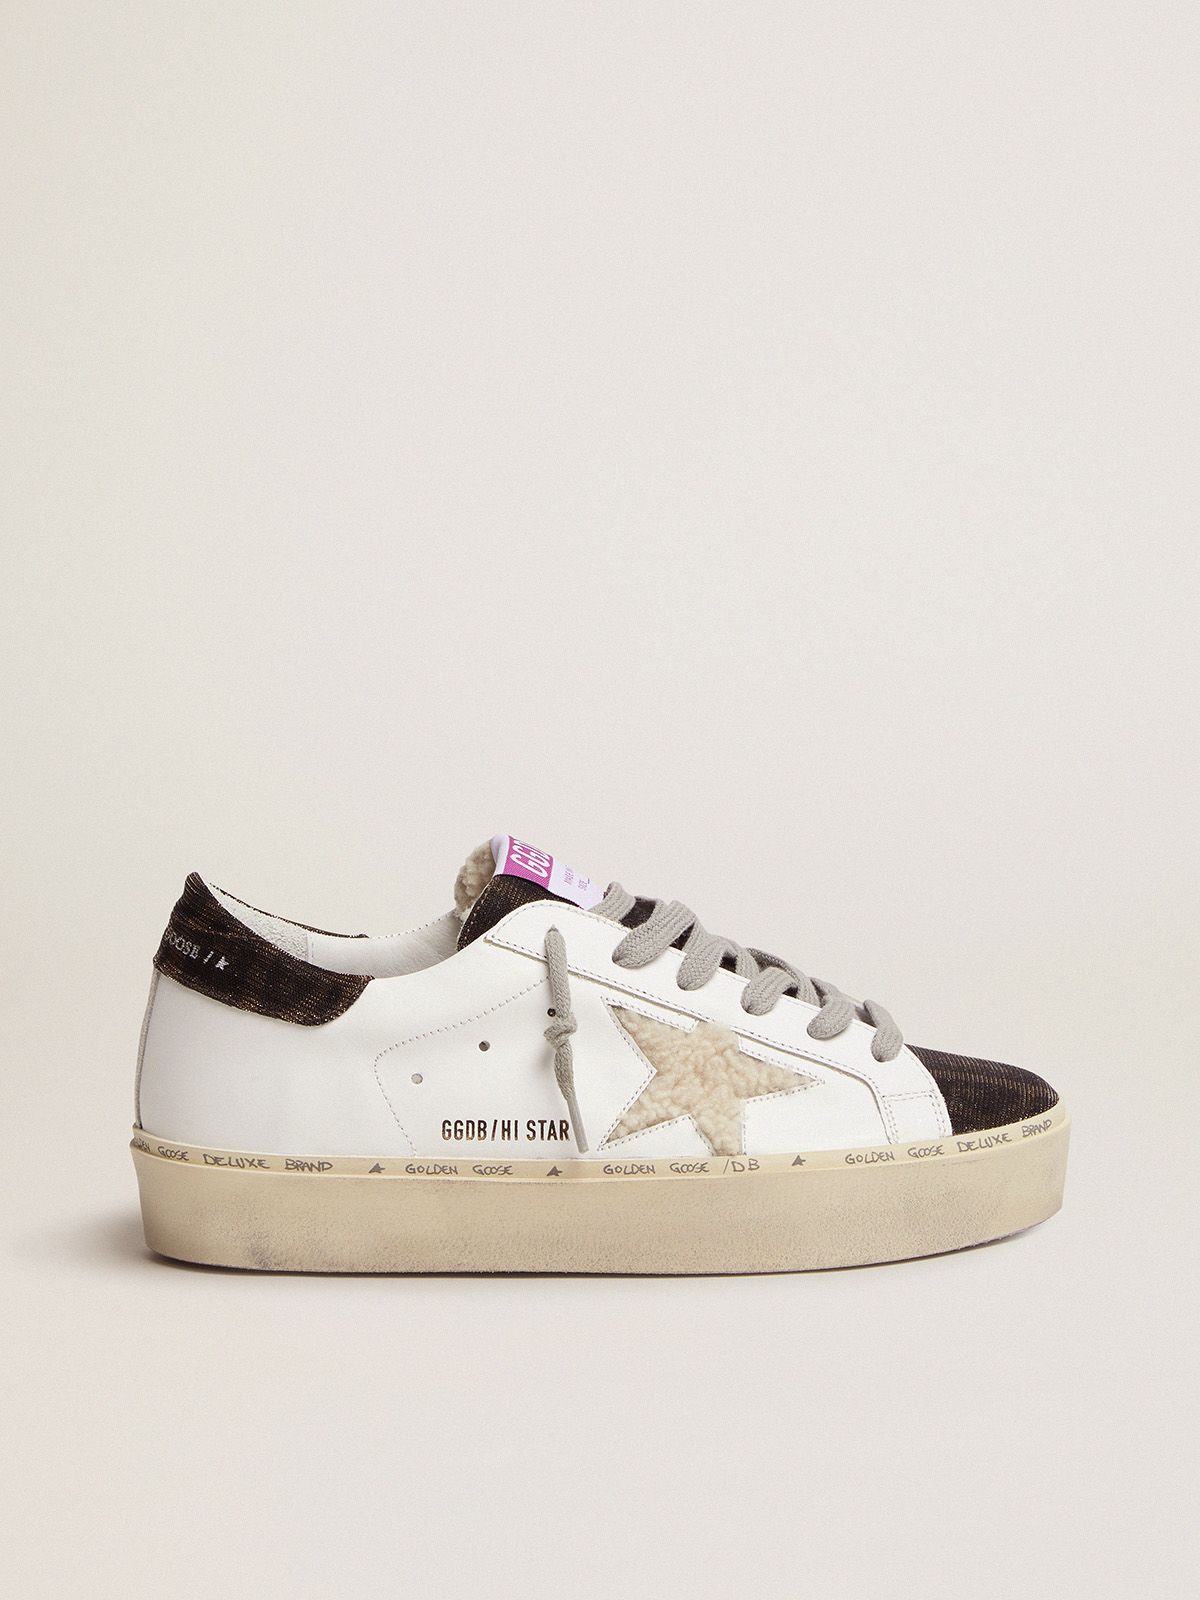 Sneakers Golden Goose Uomo Hi Star sneakers with shearling star and leopard-print tongue